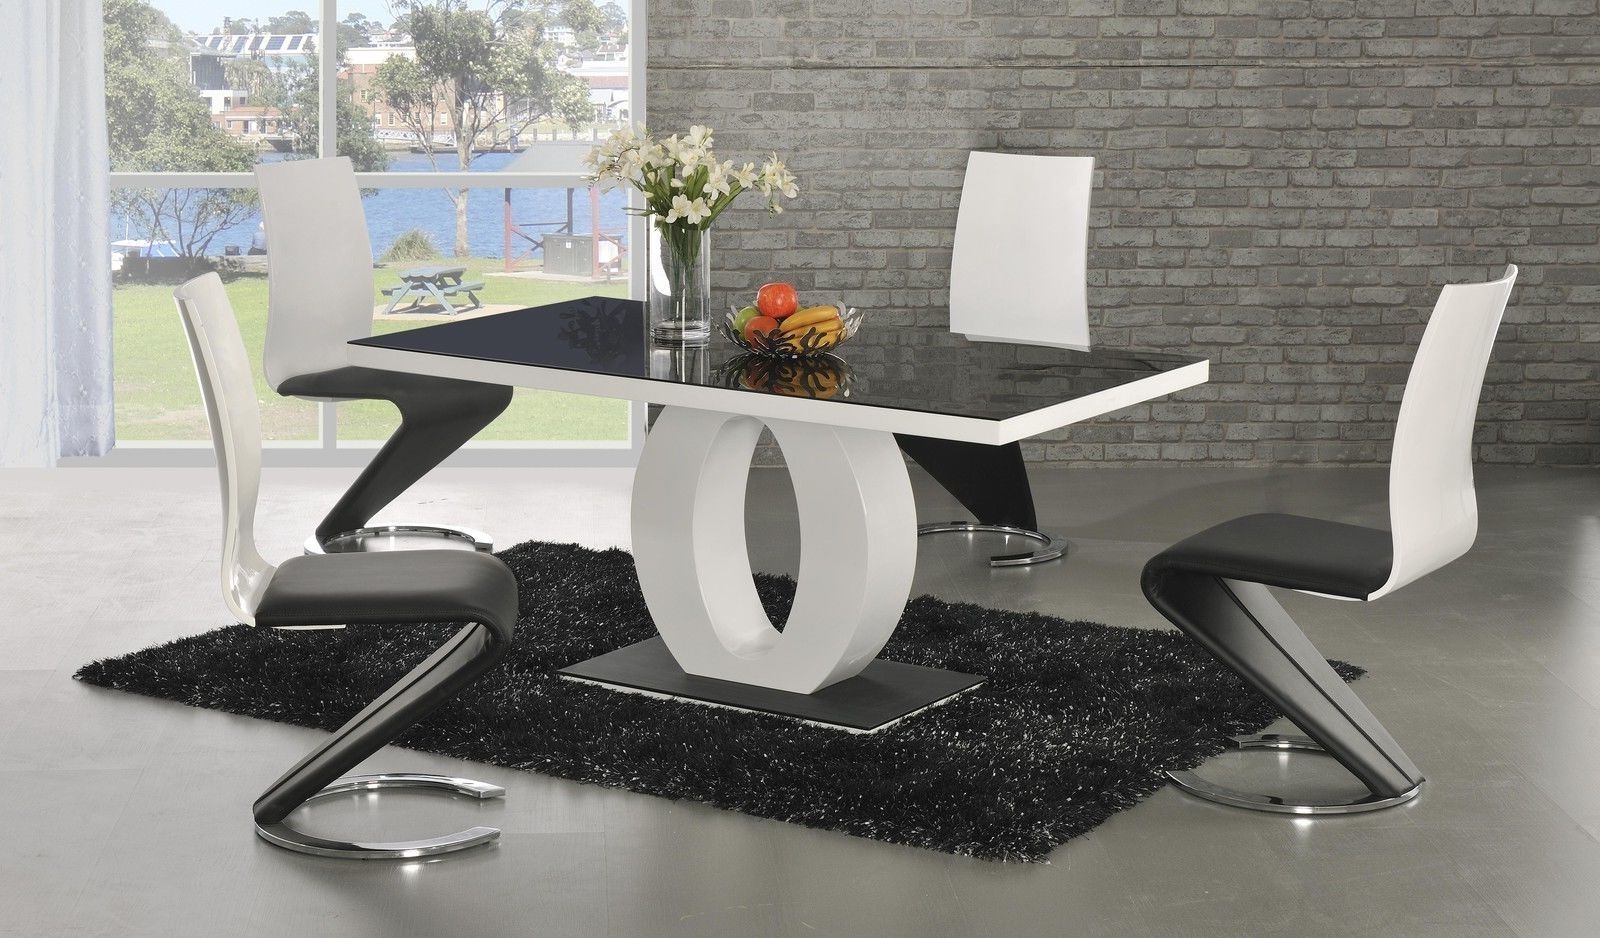 Ga Angel Black Glass White Gloss 160 Cm Designer Dining Set 4 6 Z Pertaining To Most Recent White High Gloss Dining Tables 6 Chairs (View 21 of 25)